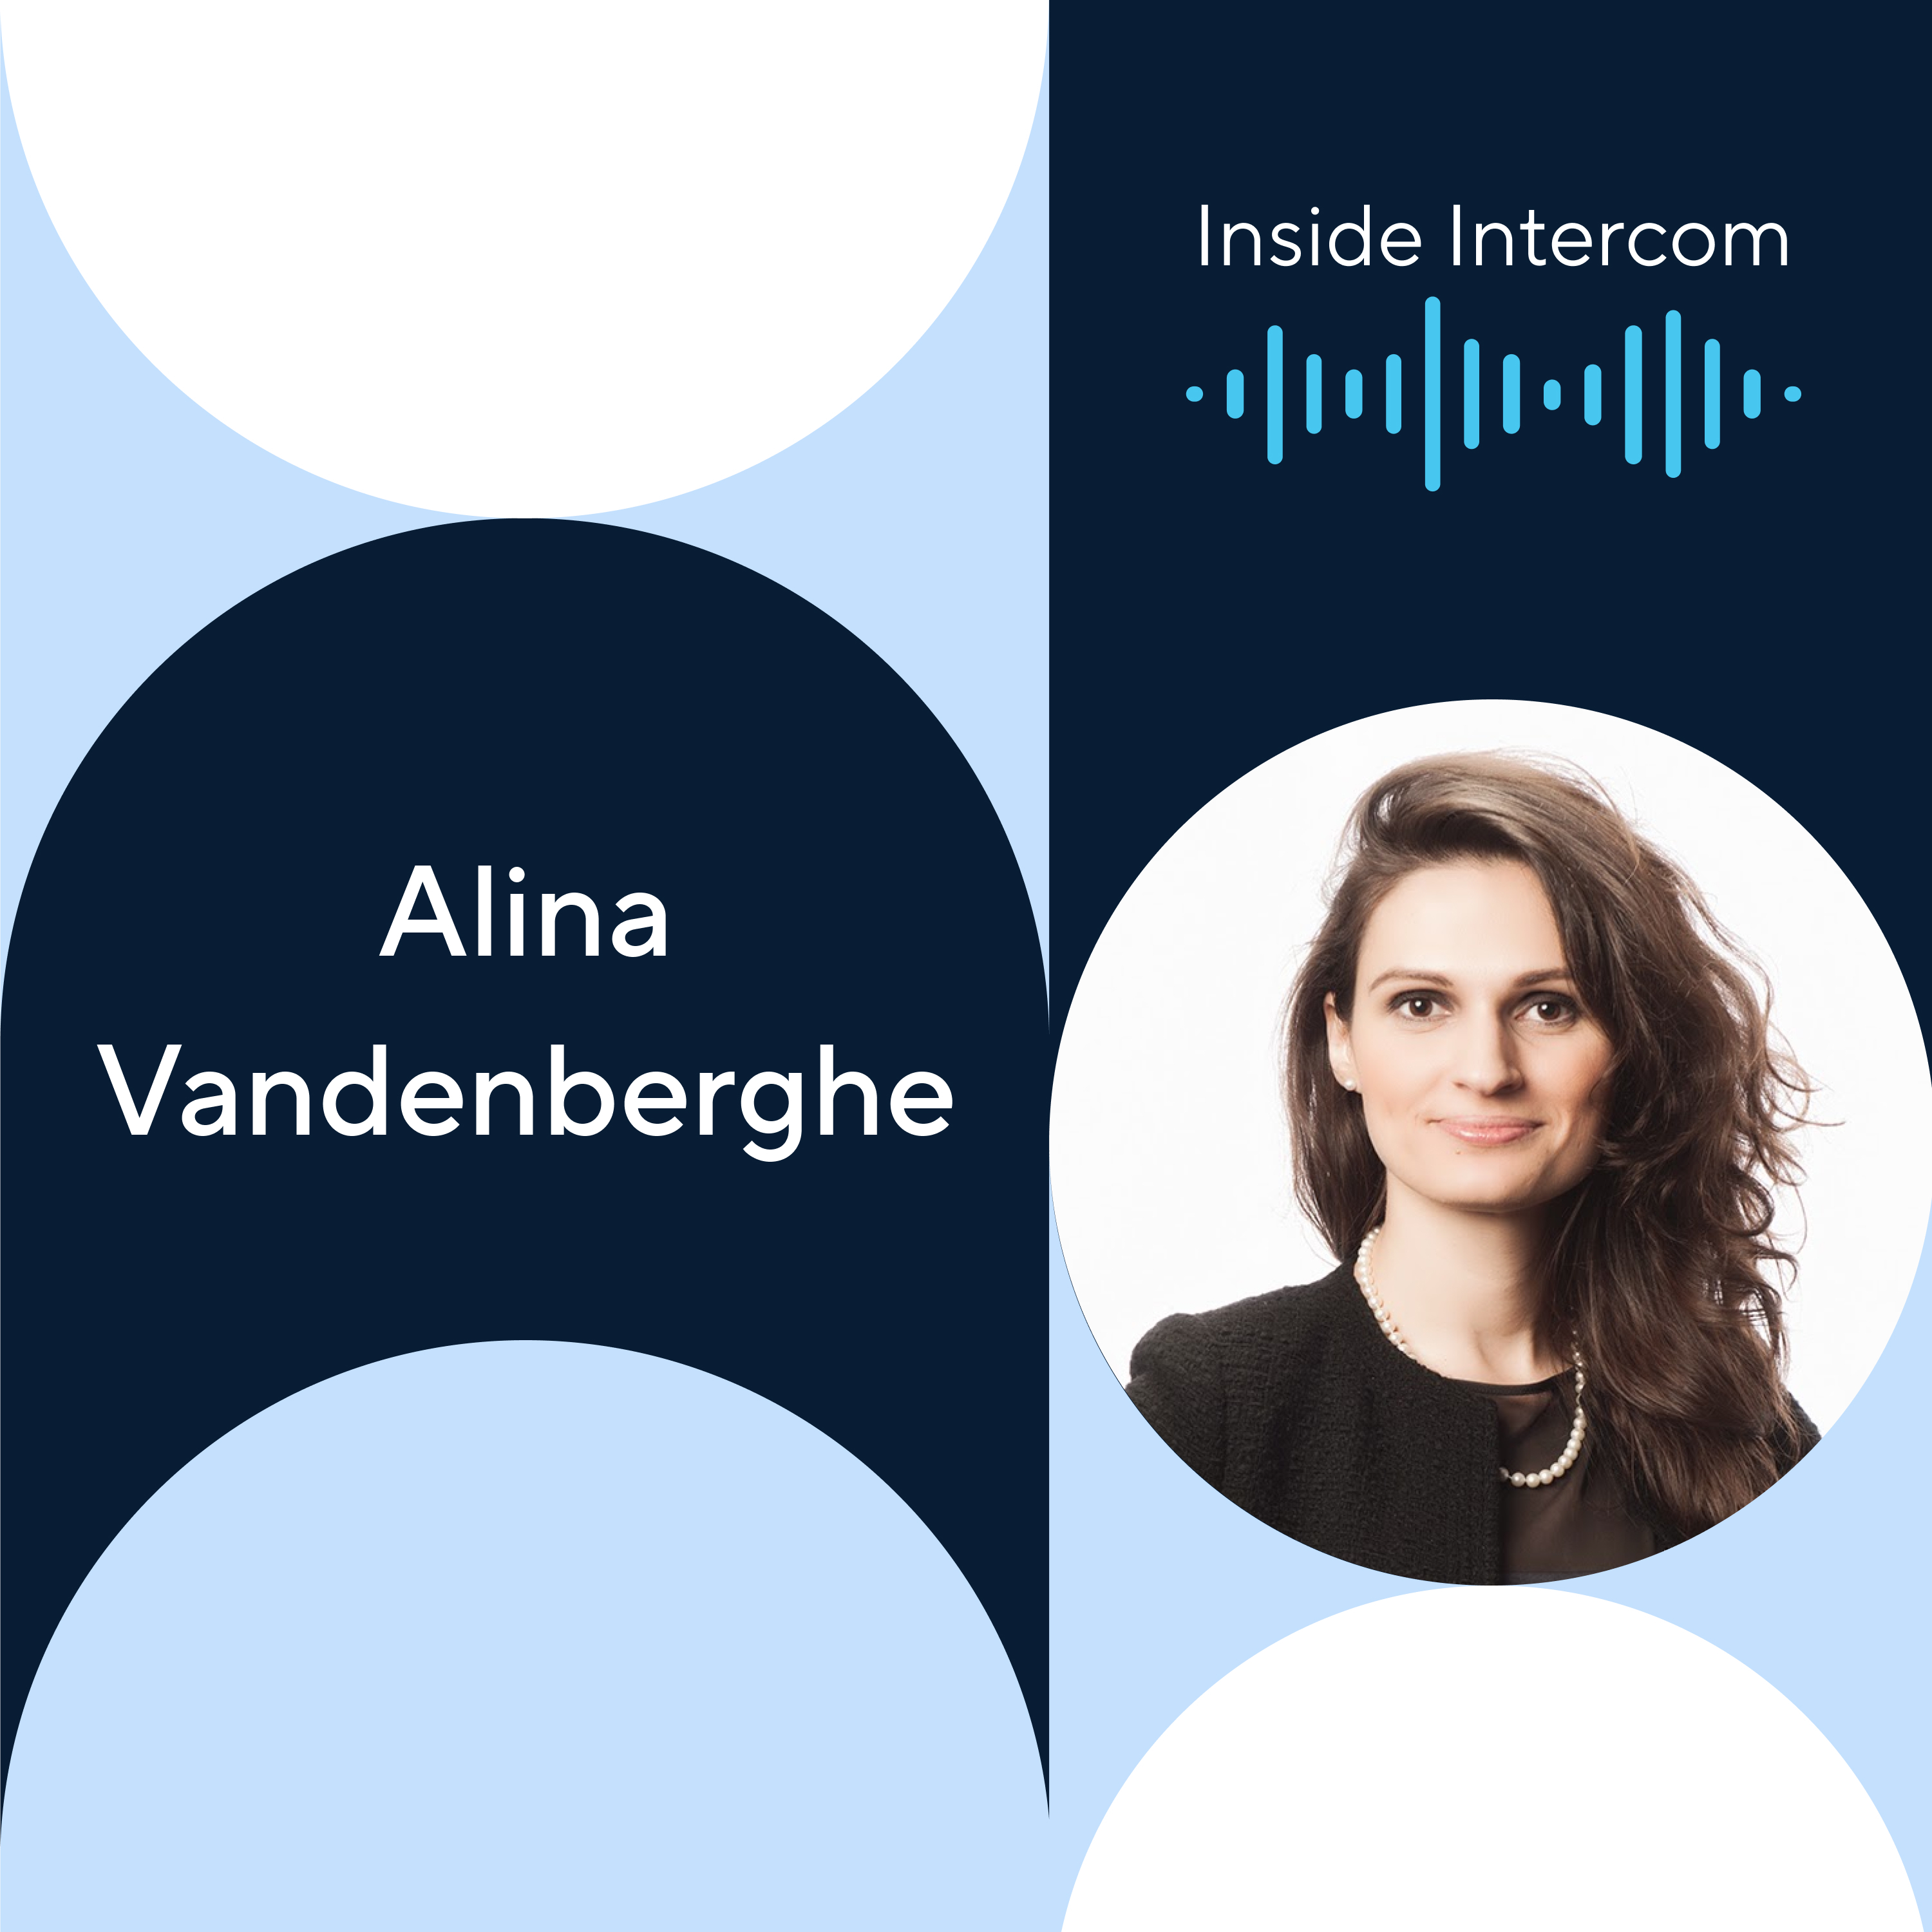 Chili Piper’s Co-Founder Alina Vandenberghe on bootstrapping your way to success